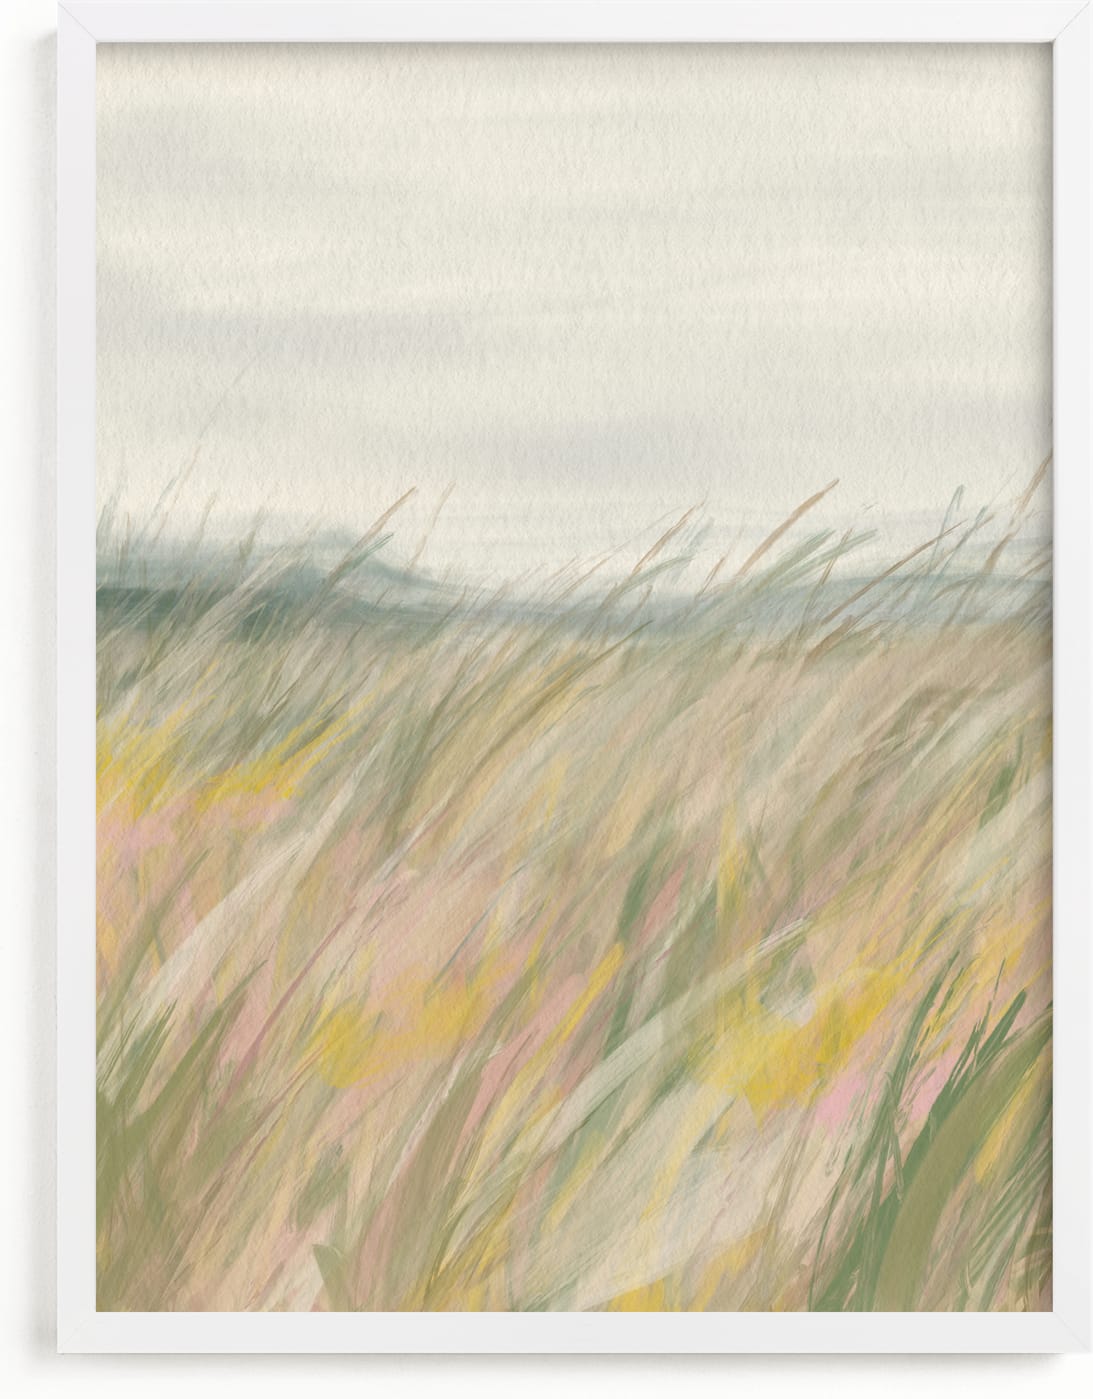 This is a yellow, beige, green art by Anne Ciotola called Dune.